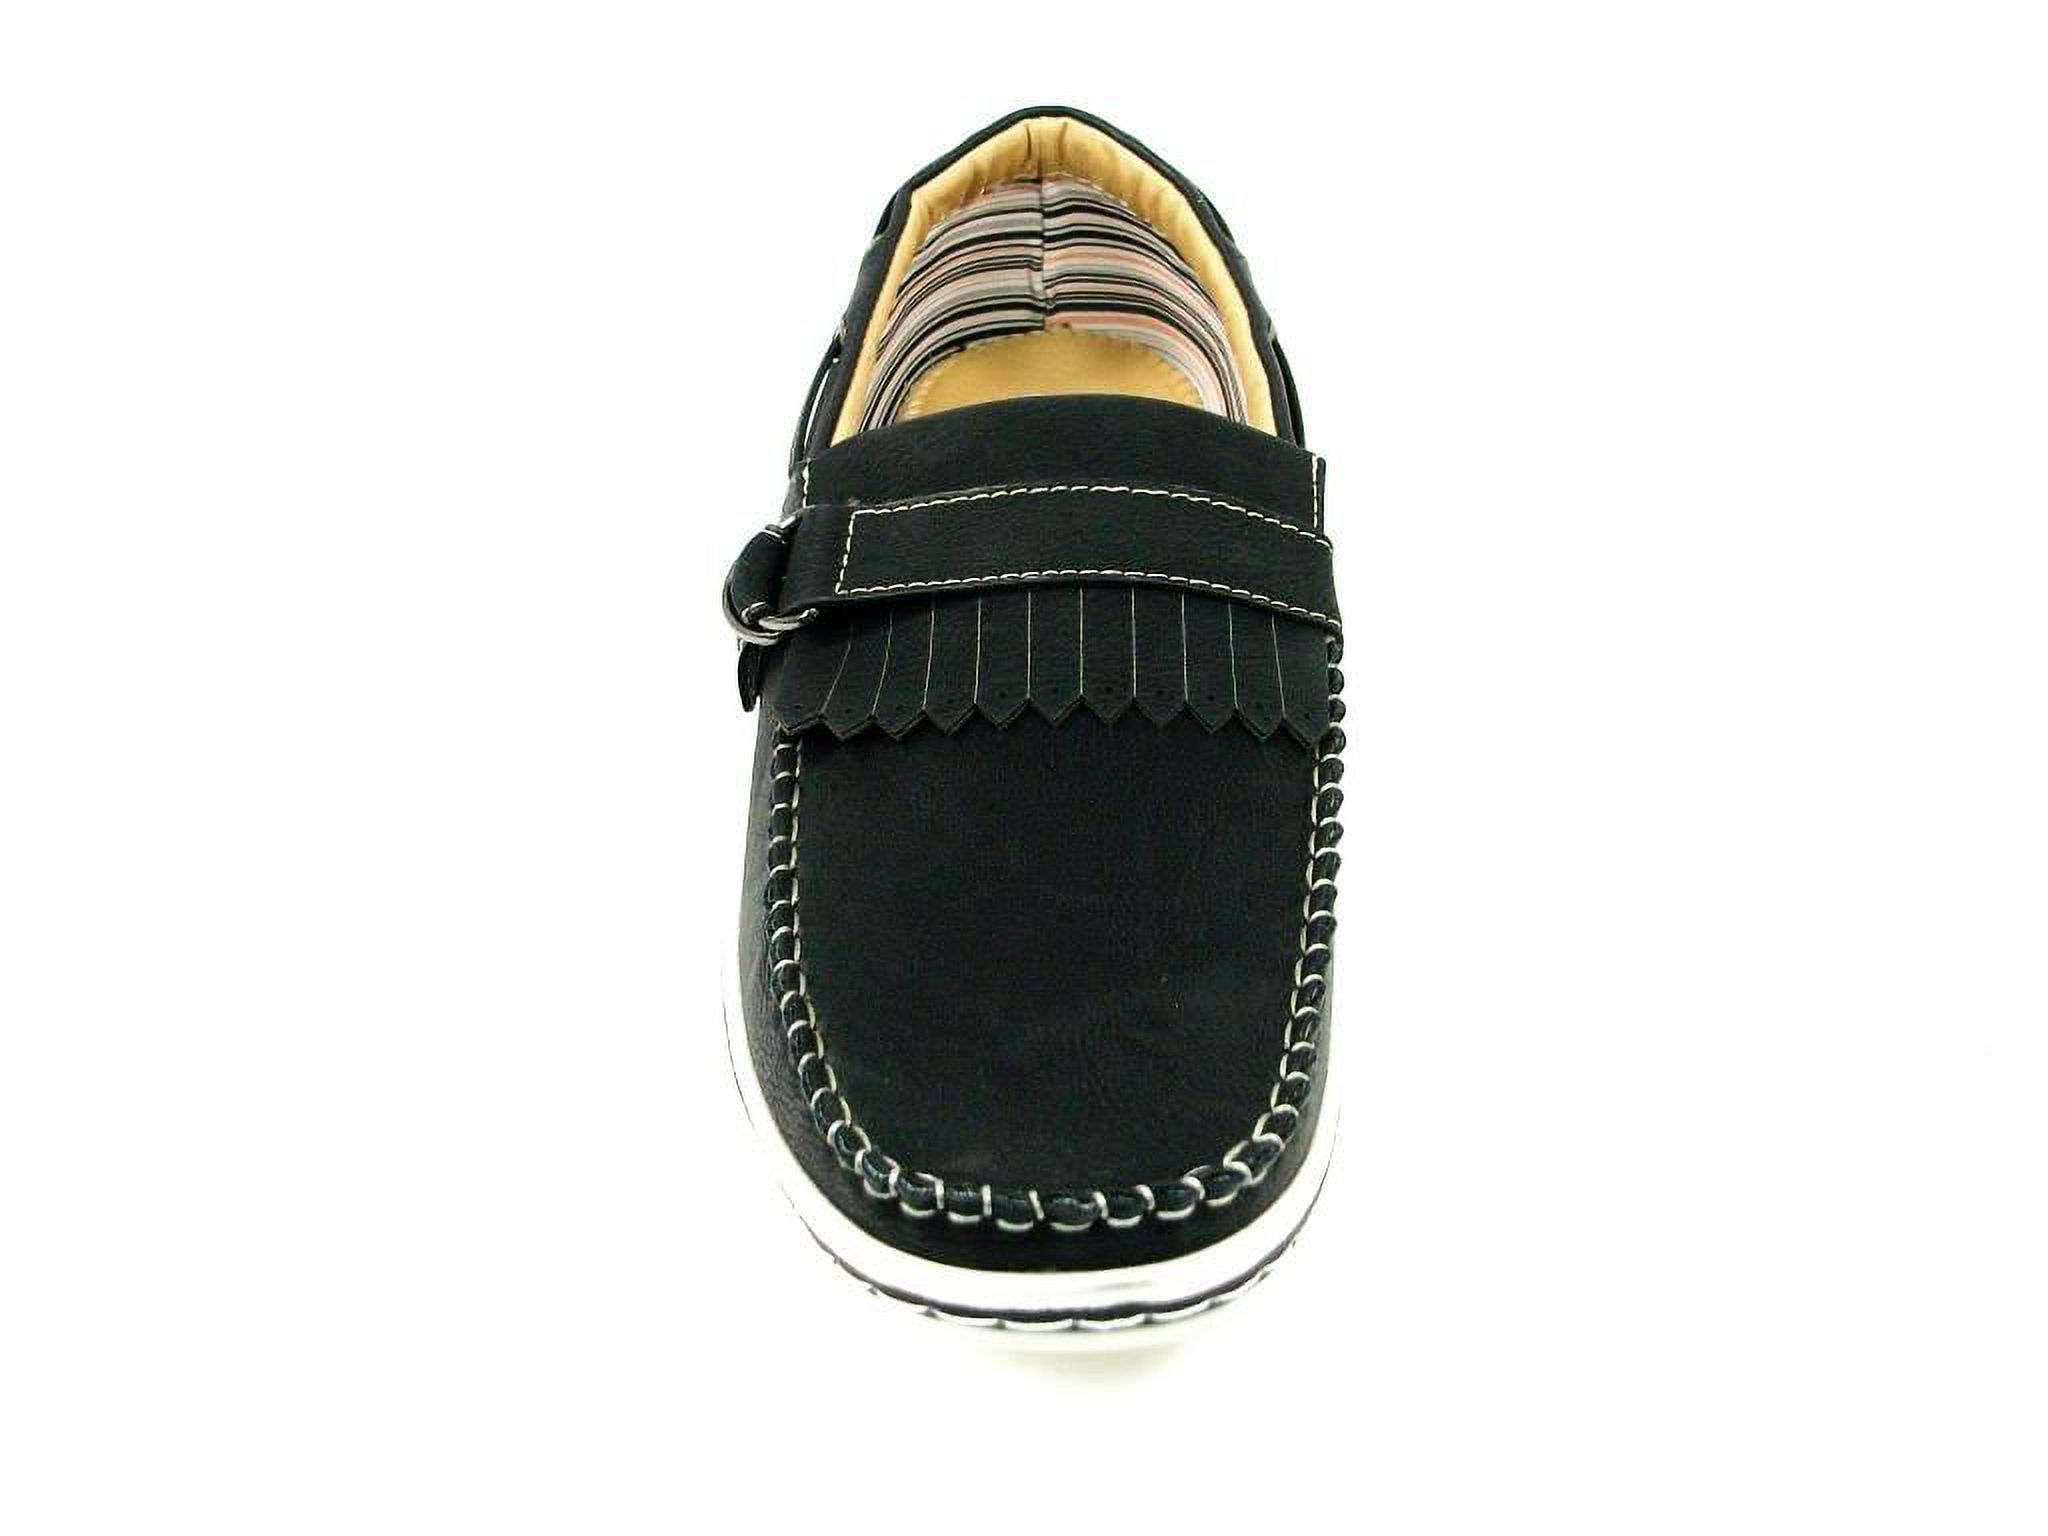 Polar Fox Mens Black Slip on Casual Driving Boat Shoes Buckle Design Styled In Italy - image 4 of 6